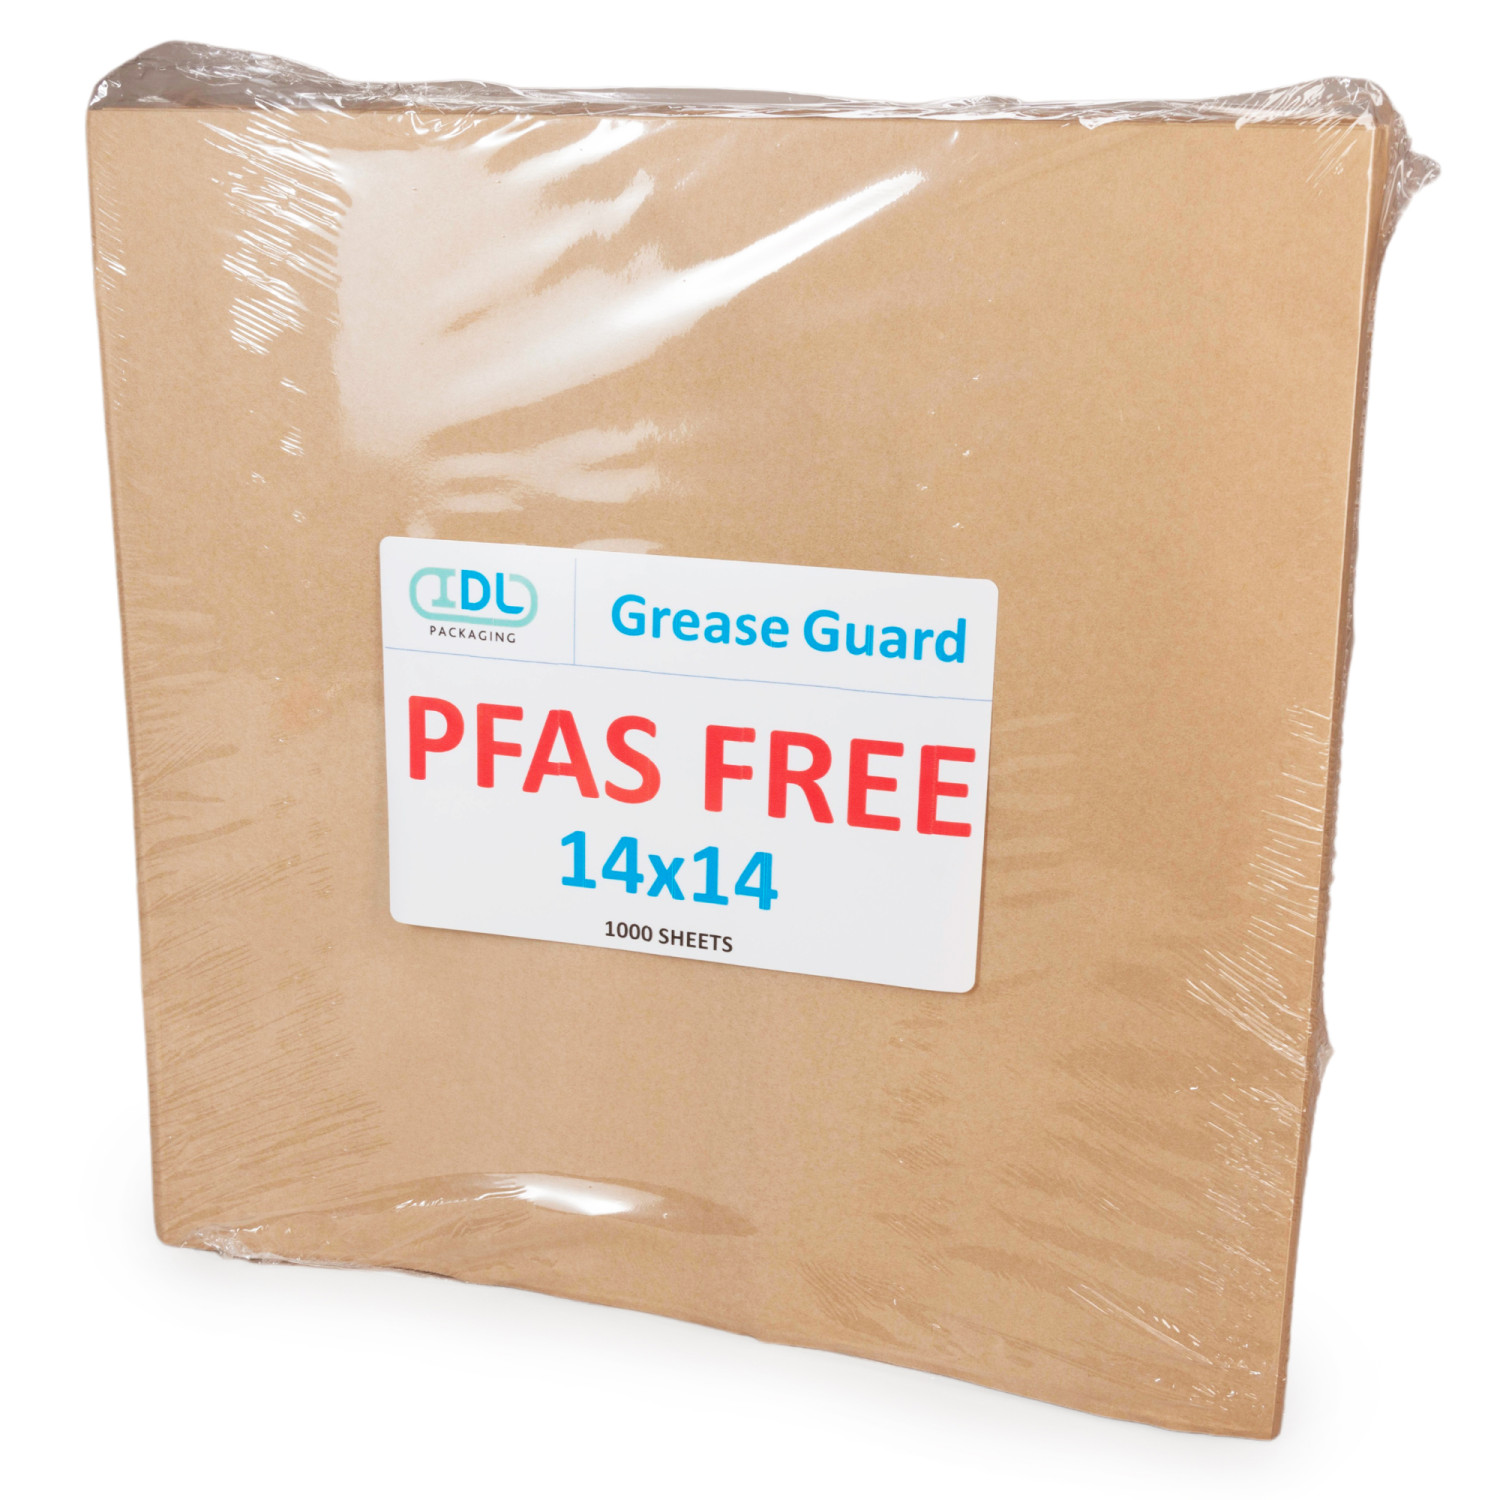 Grease Proof Paper - Grease Proof and Oil Proof Paper Sheets